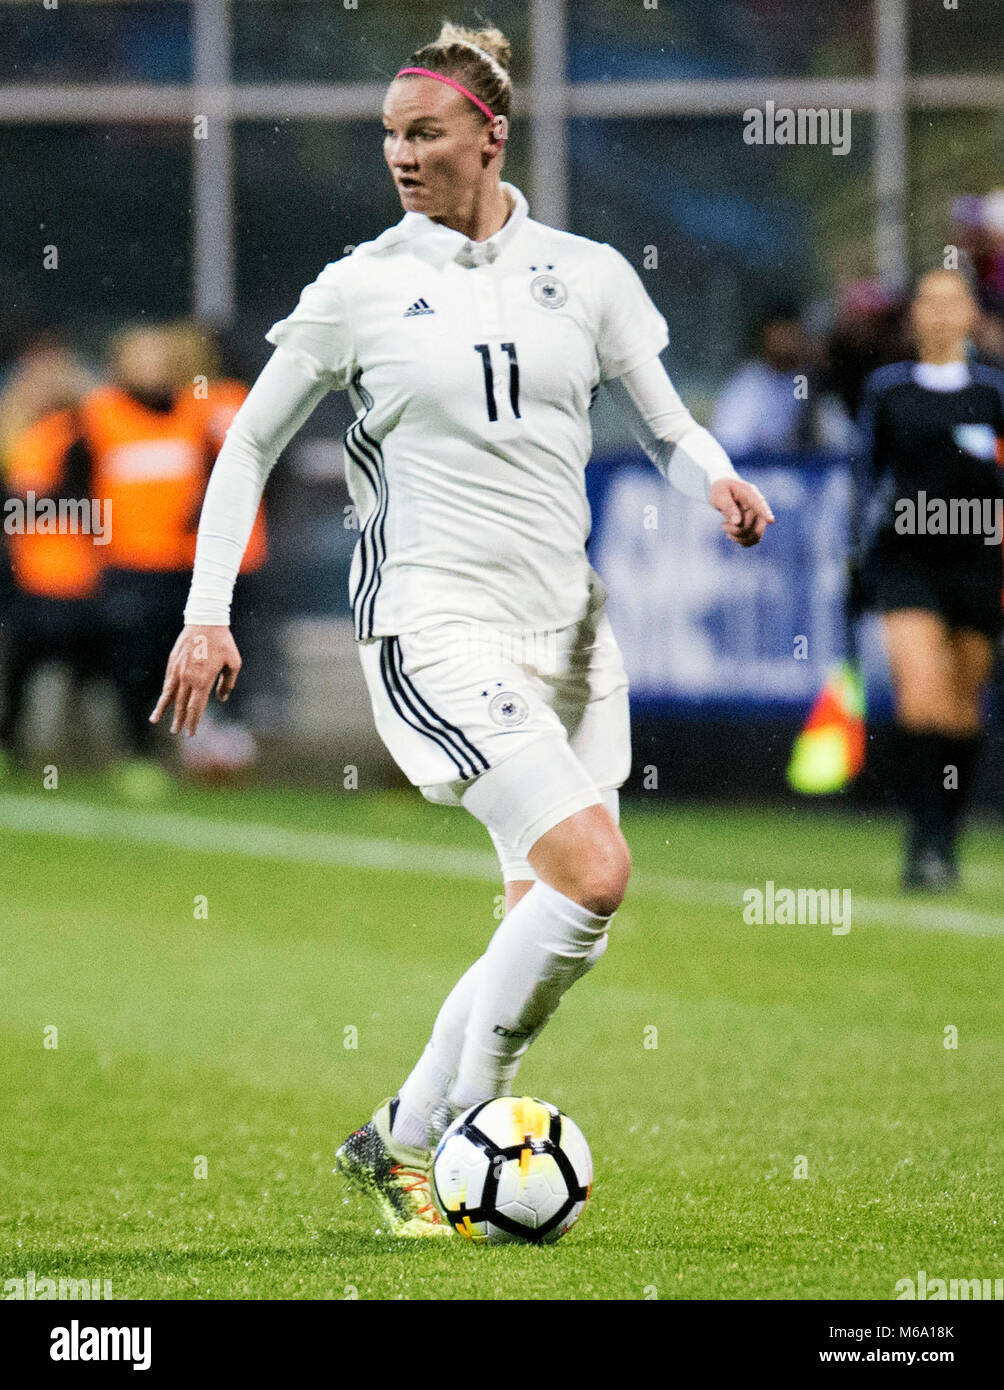 Columbus, Ohio, USA. March 1, 2018: Germany forward Alexandra Popp (11) handles the ball gainst the USA during their match at the SheBelieves Cup in Columbus, Ohio, USA. Brent Clark/Alamy Live  News Stock Photo